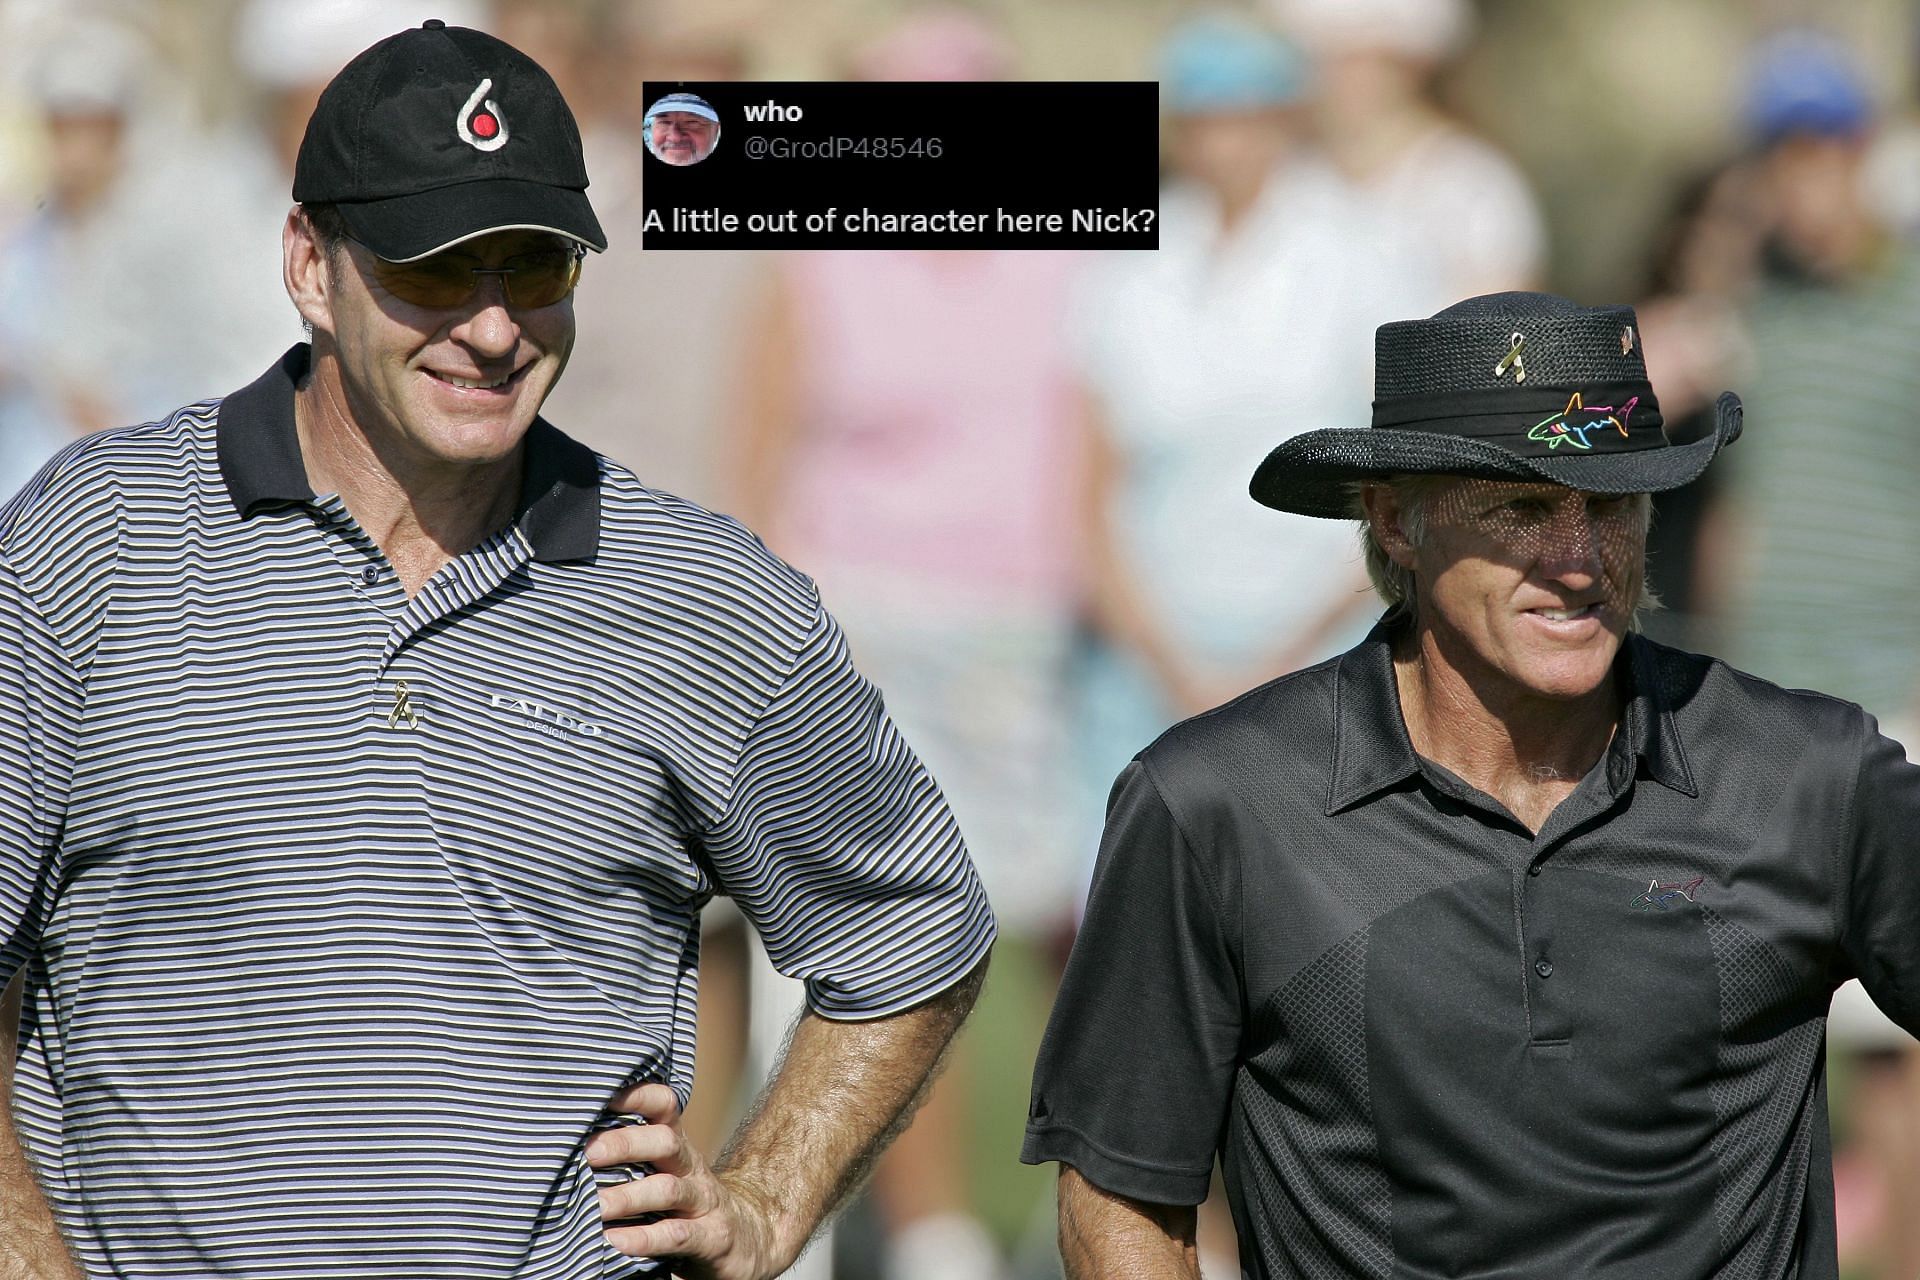 Nick Faldo took a dig at Greg Norman on Twitter